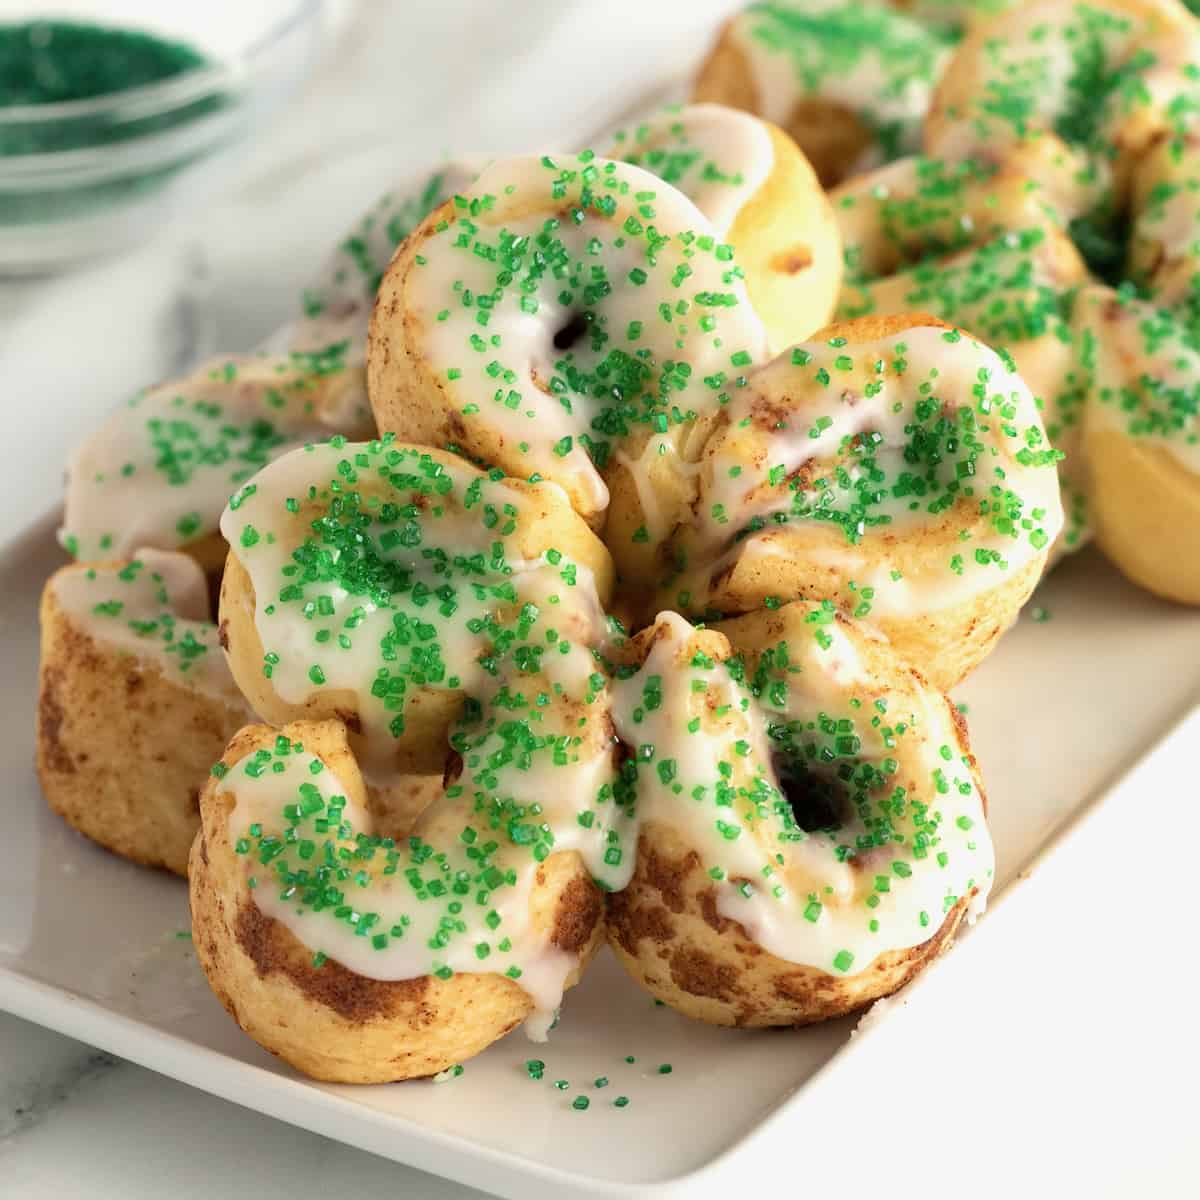 St. Patrick's Day Cinnamon Rolls from The BakerMama